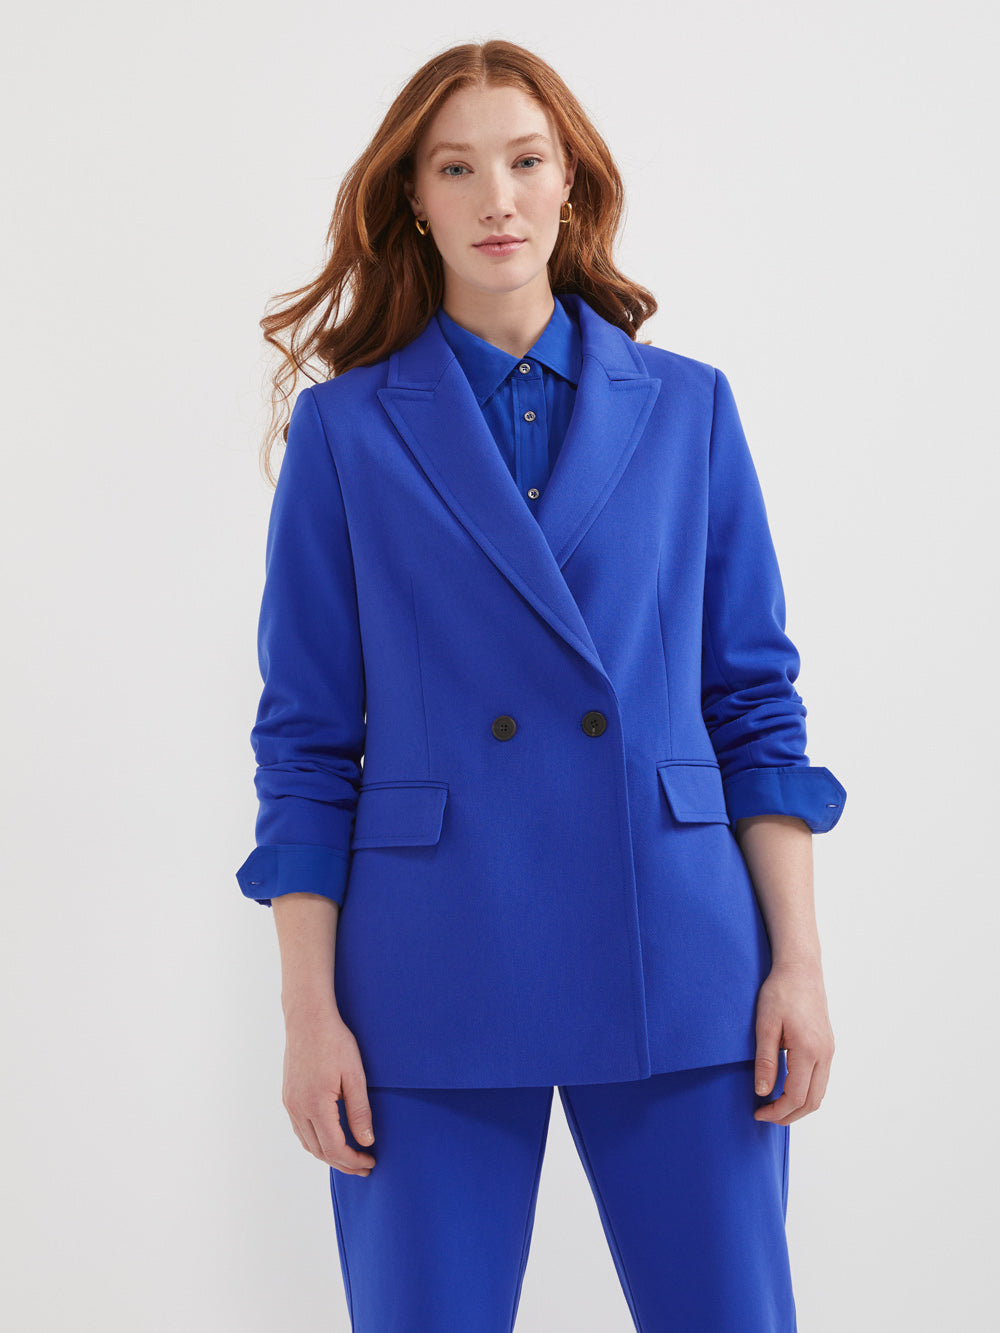 Royal Blue Formal Pants Suit With Single Breasted Blazer and Straight Pants  High Waist, Blue Blazer Trouser Suit for TALL Women 